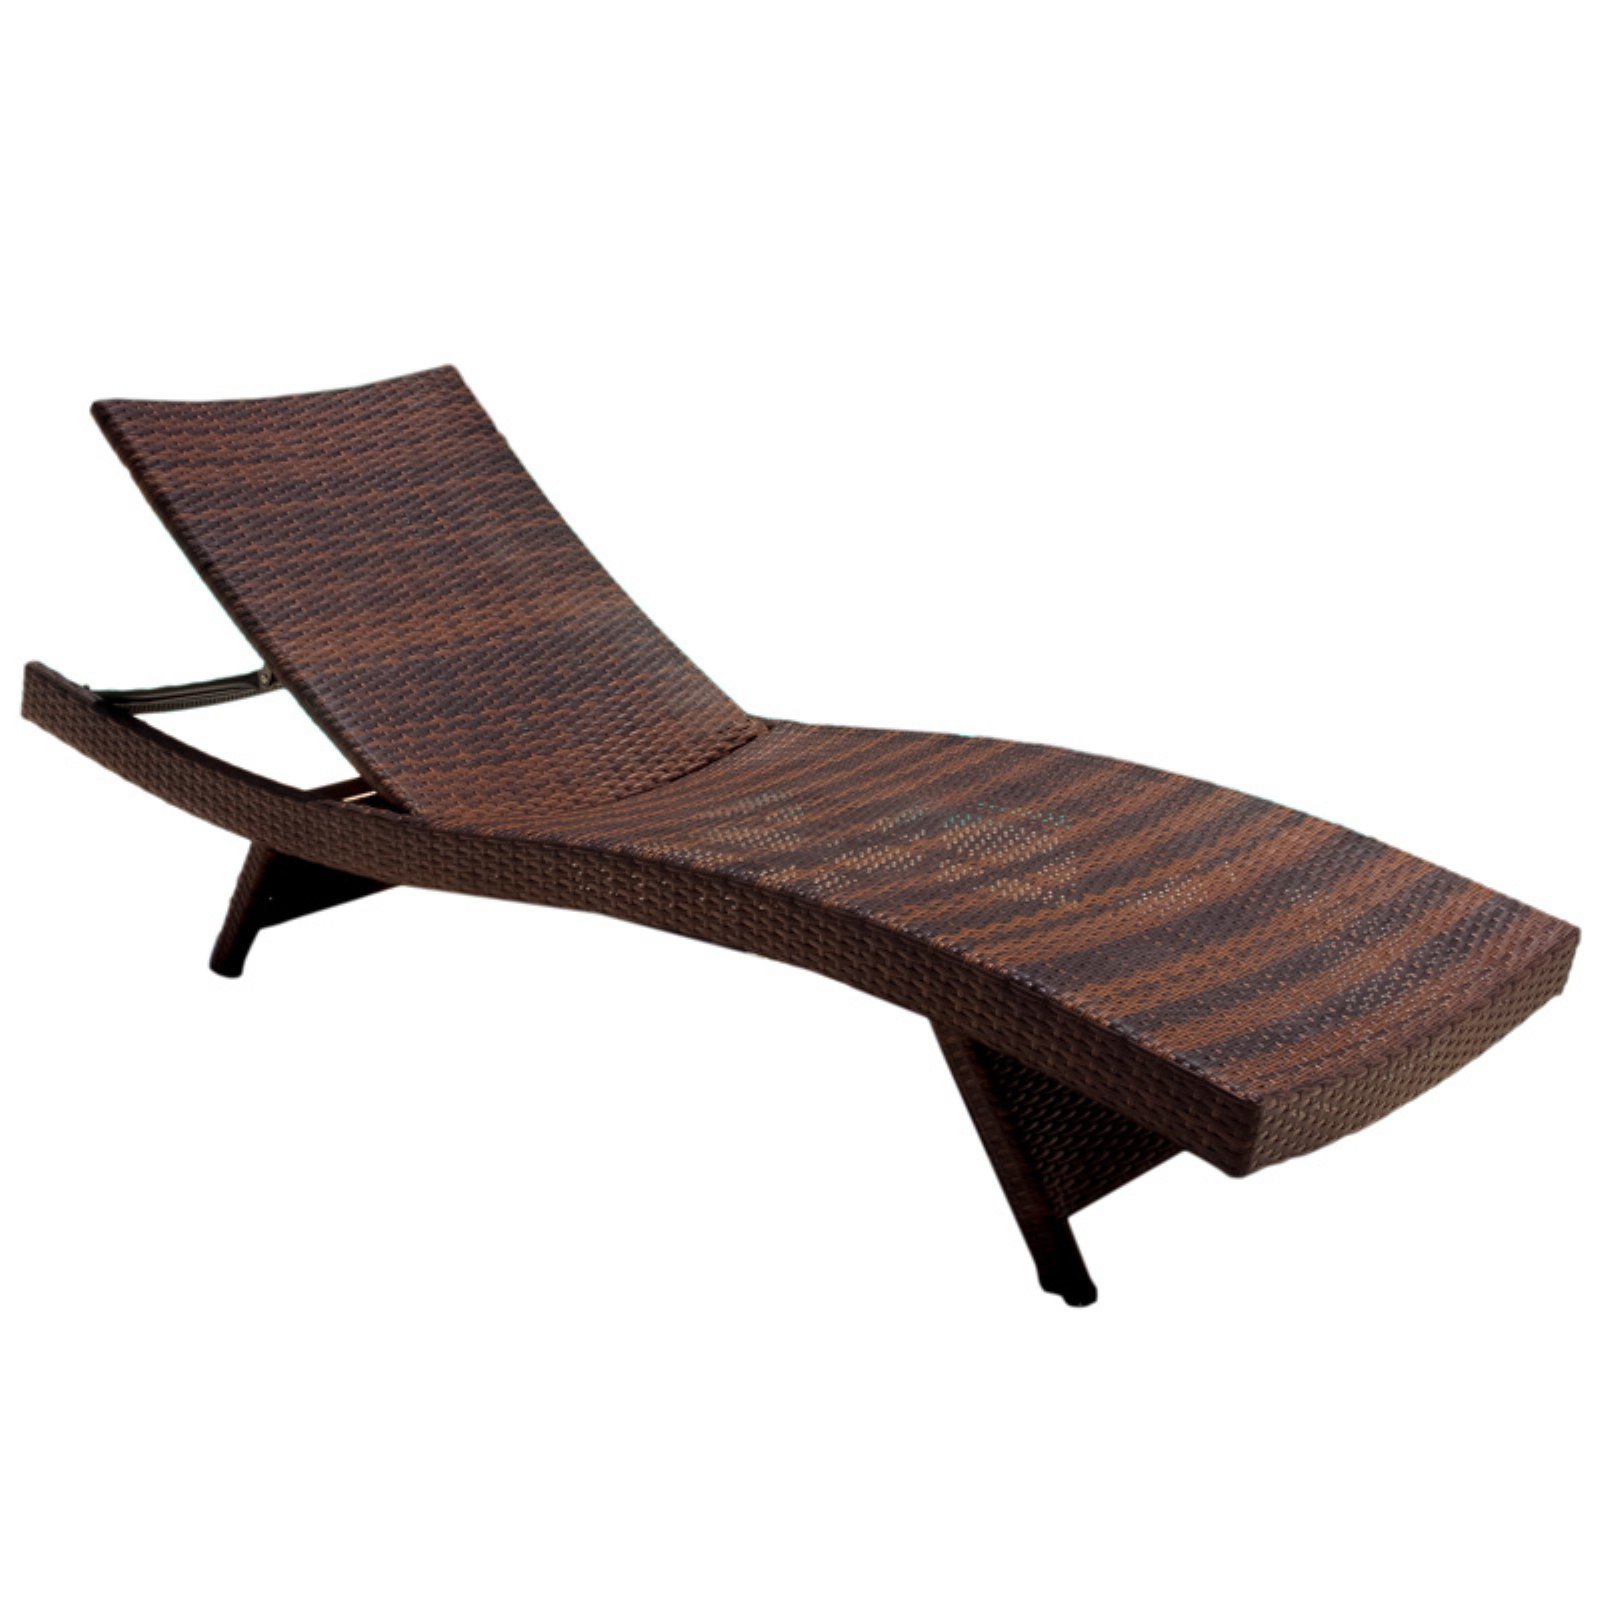 Lenin Outdoor Wicker Chaise Lounge Chair - Multi-Brown - image 2 of 11